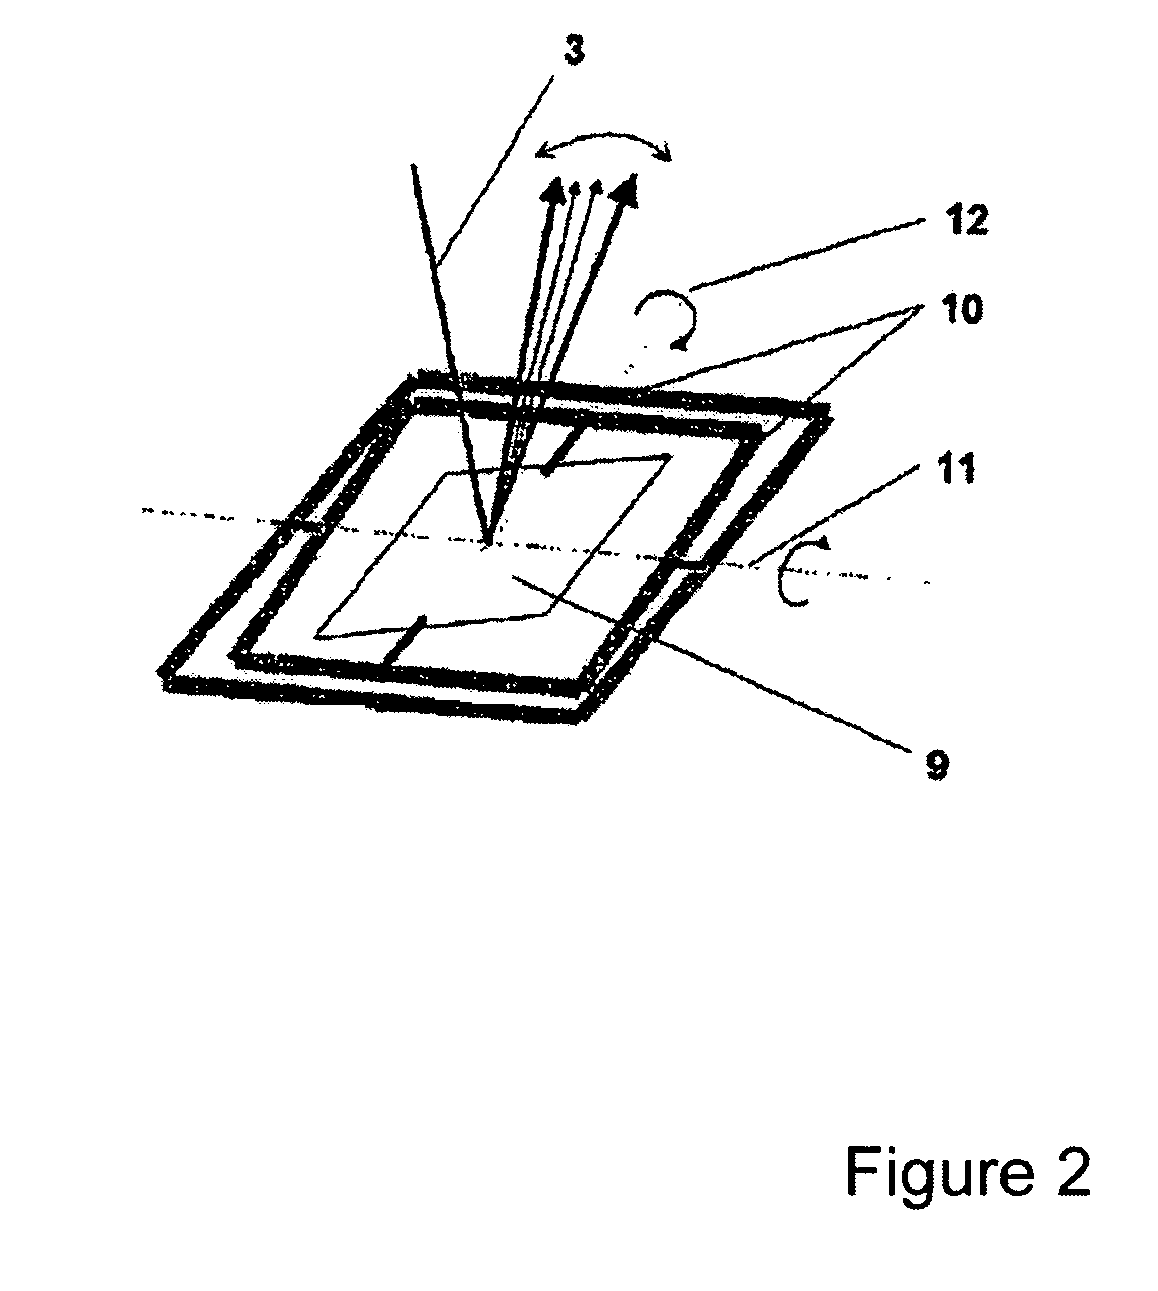 Illumination unit for the generation of optical sectional images in transparent media, in particular in the eye